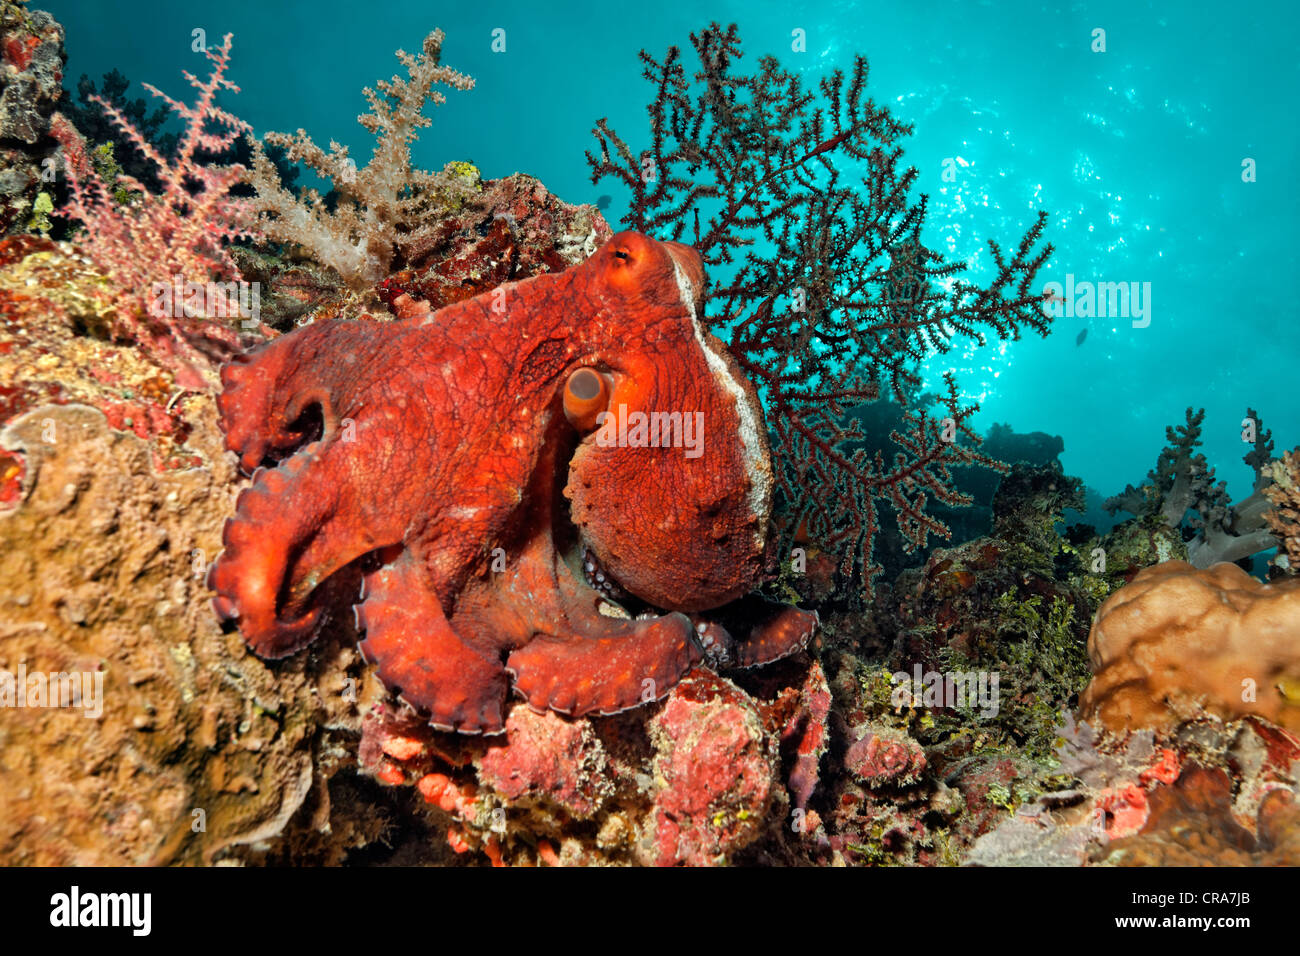 Octopus (Octopus vulgaris), red, sitting on coral reef, Great Barrier Reef, UNESCO World Heritage Site, , Australia, Pacific Stock Photo